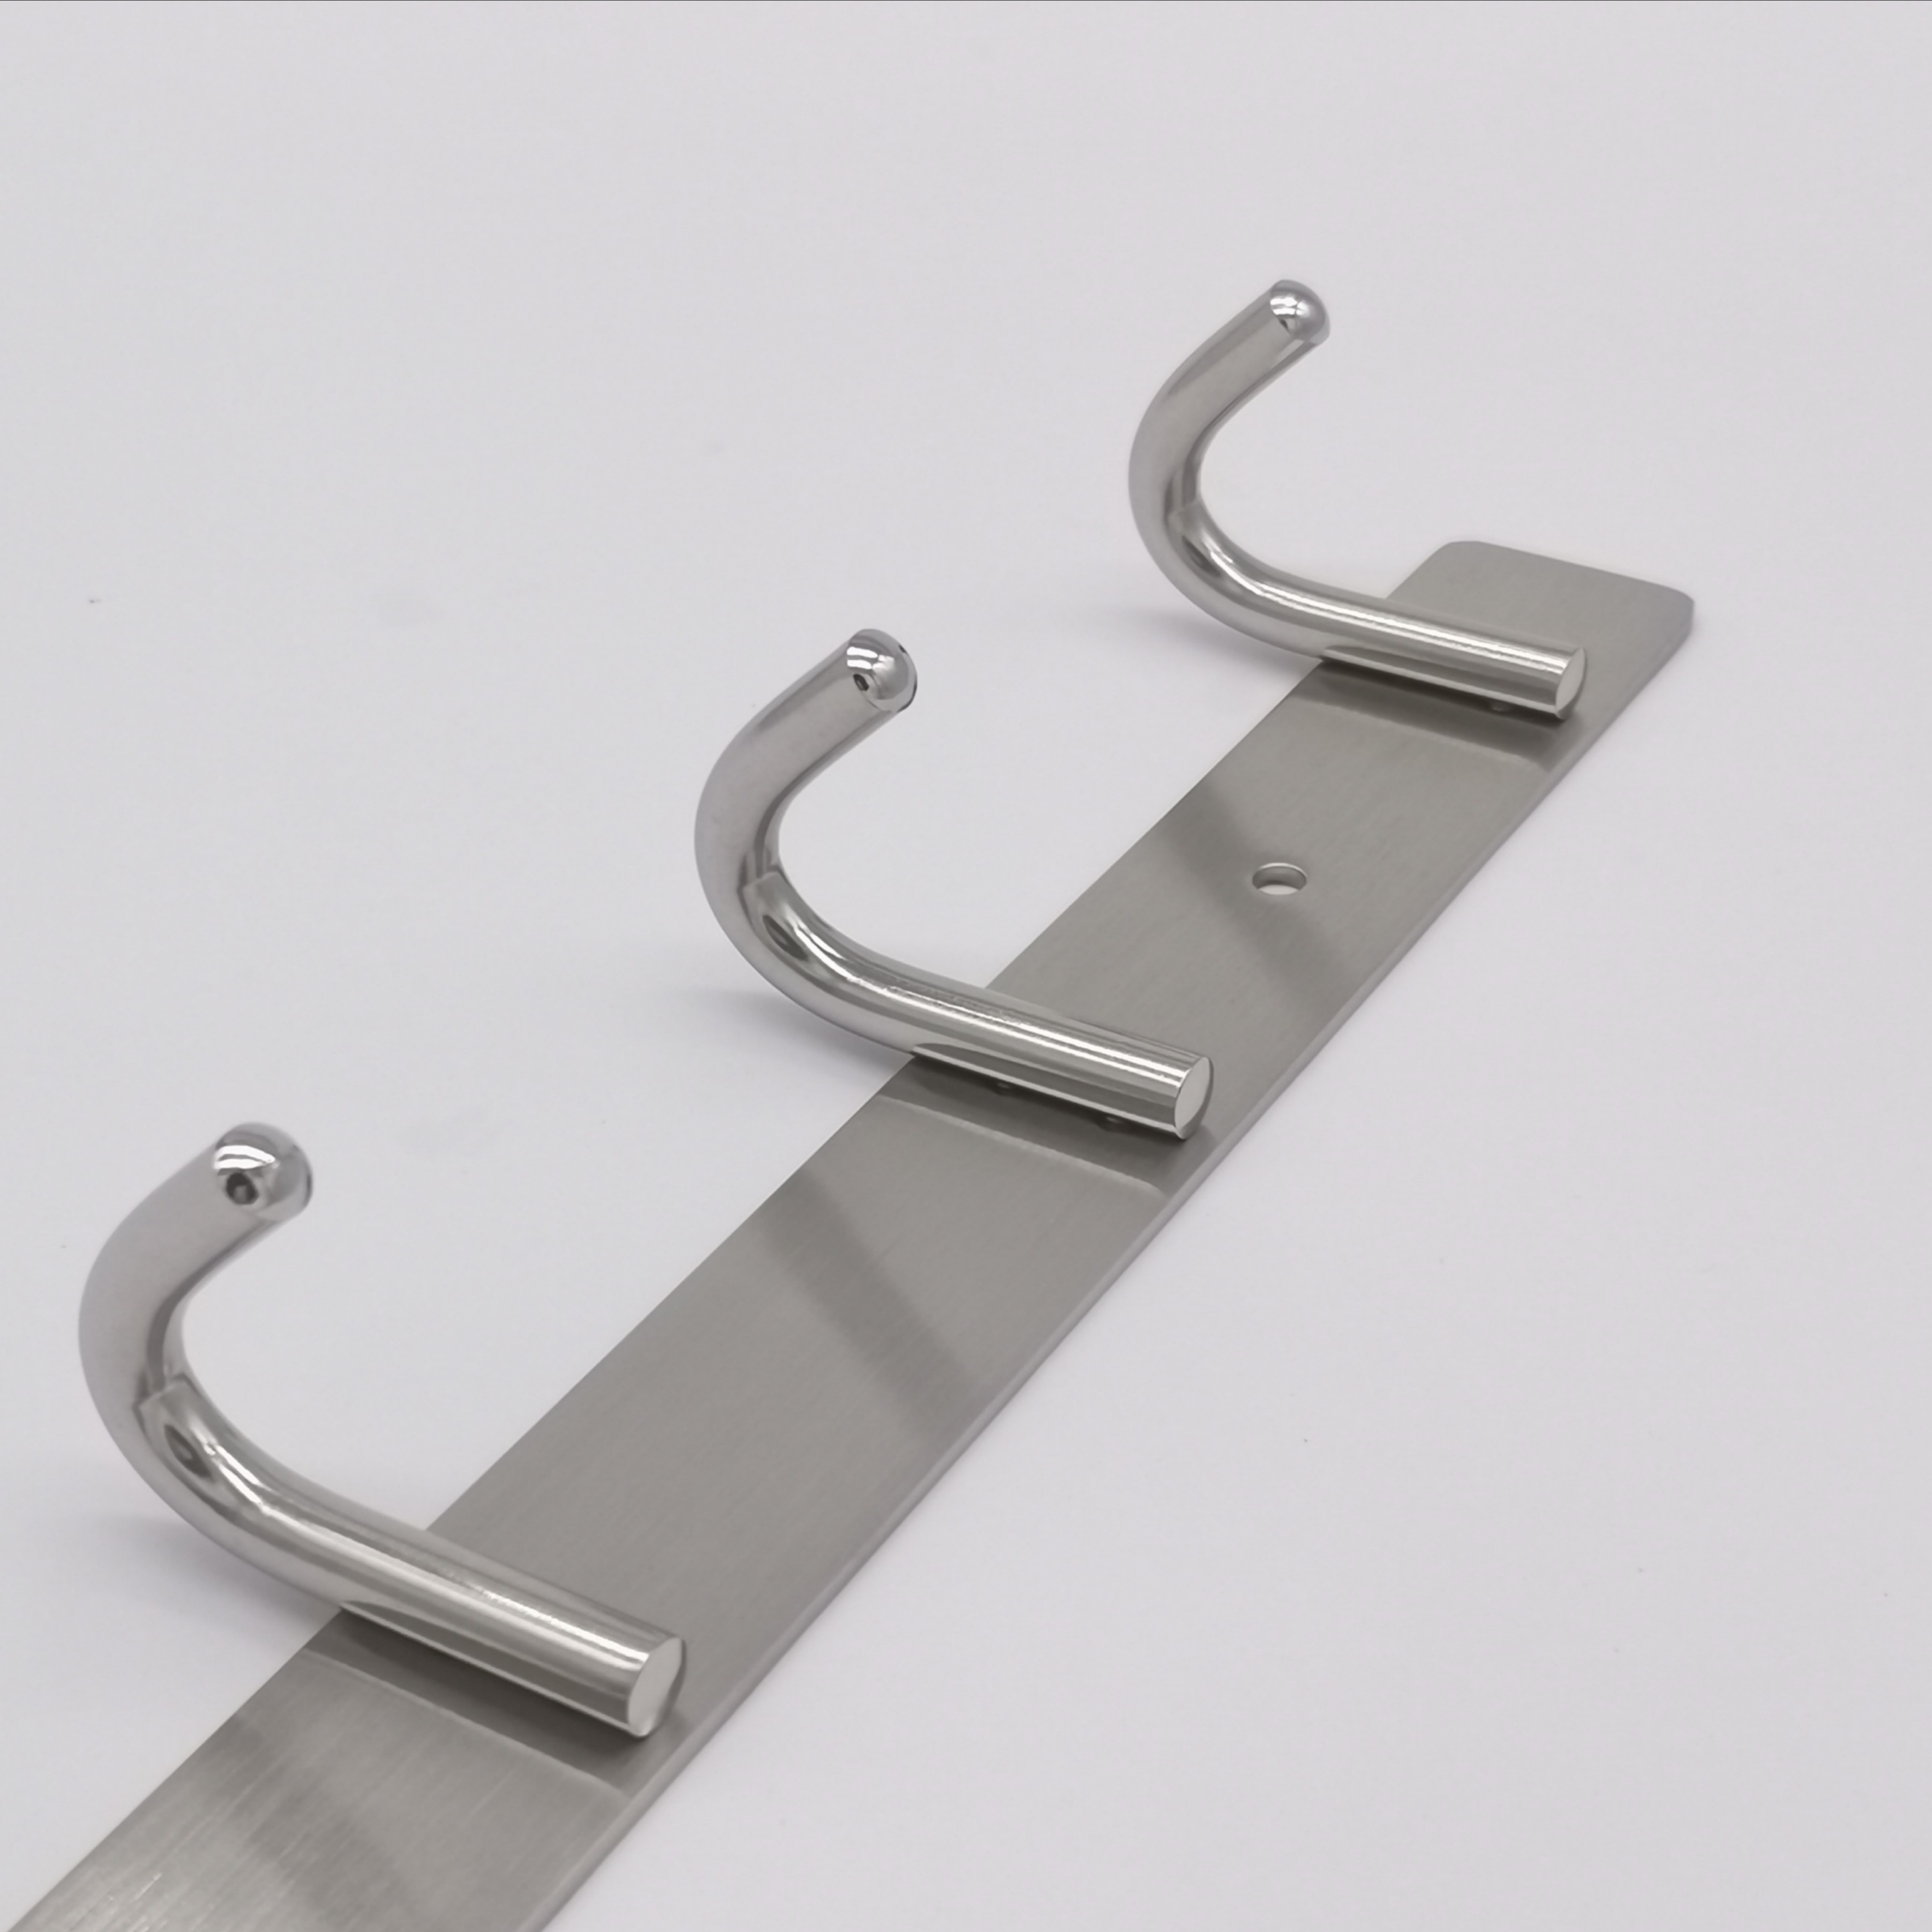 HKS1021 stainless steel hanging coat hook rail with 5 hook 